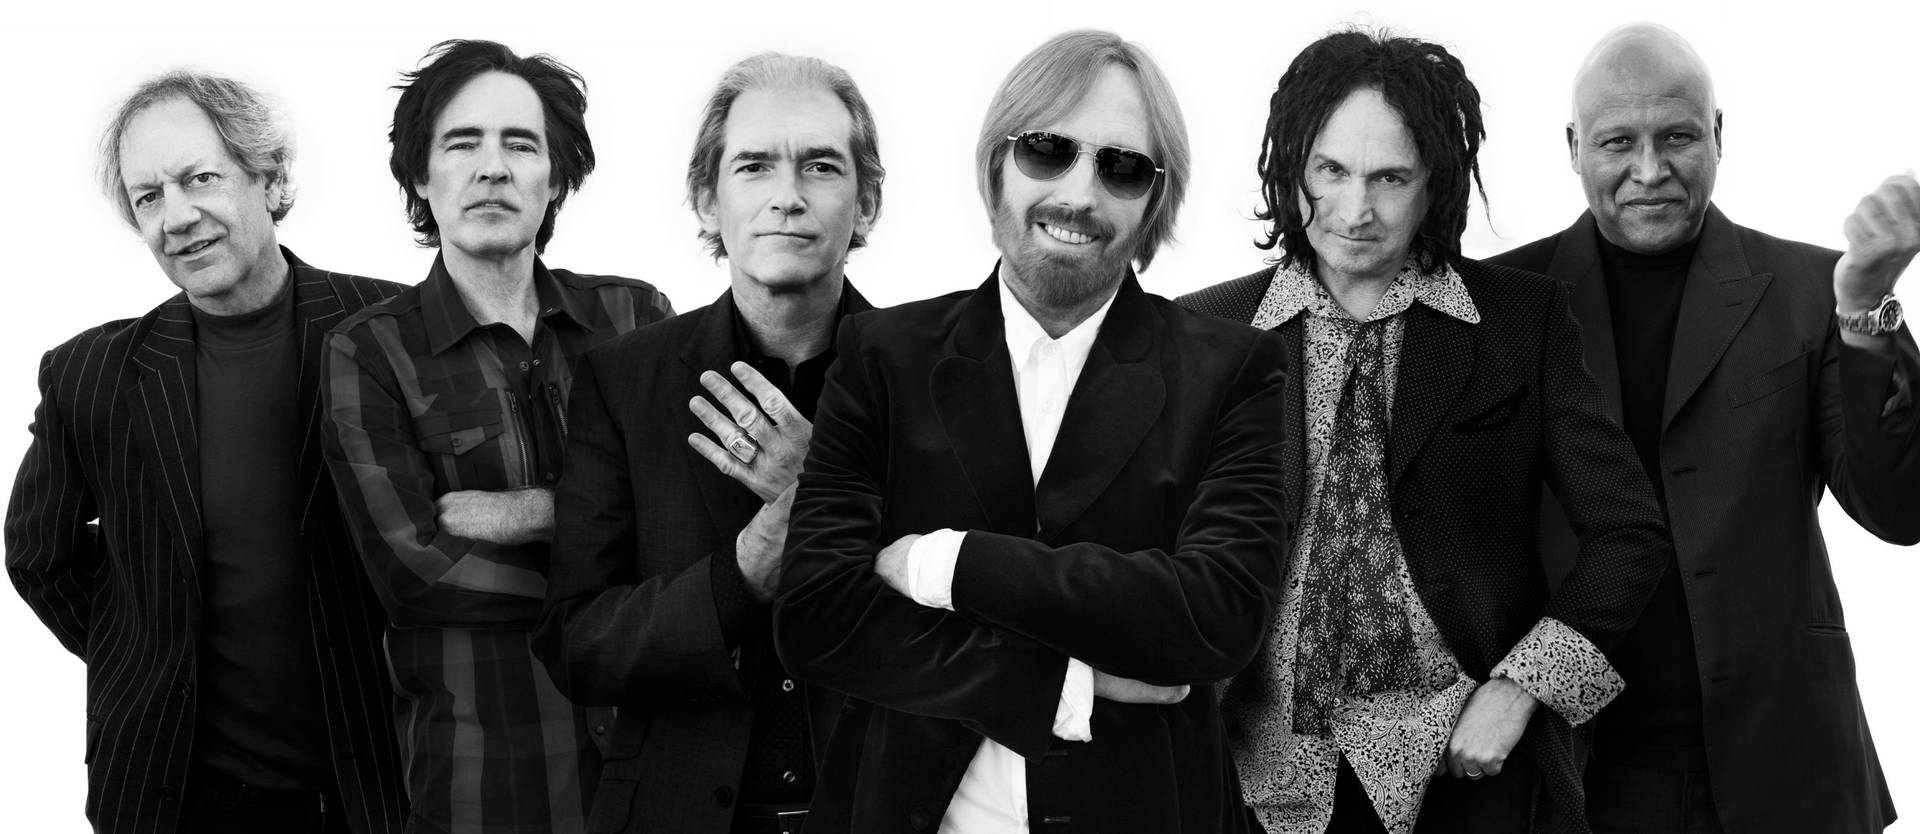 Iconic Tom Petty And The Heartbreakers electrifying concert moment. Wallpaper